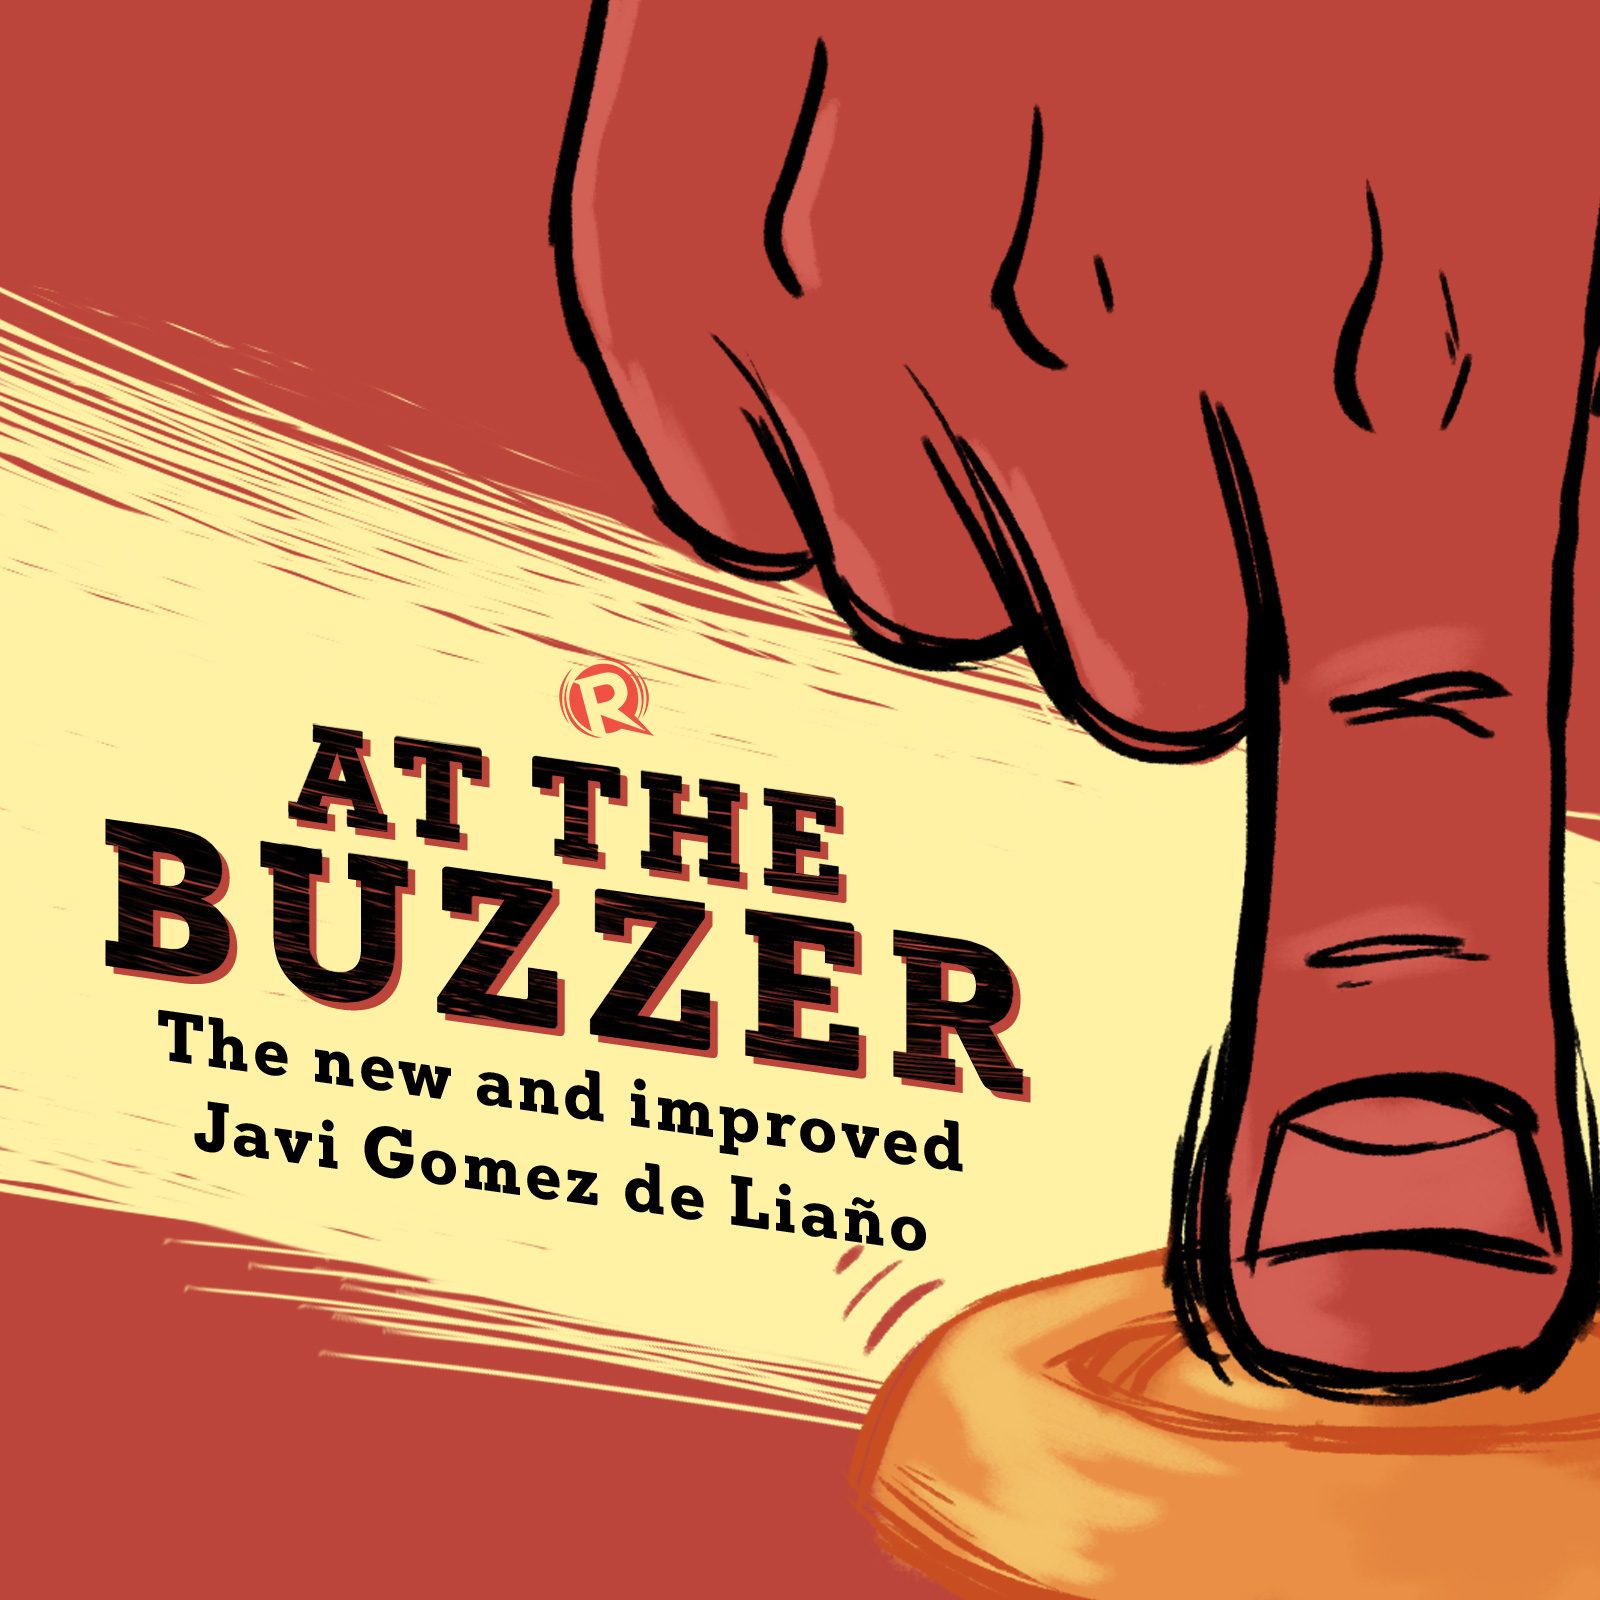 [PODCAST] At the Buzzer: The new and improved Javi Gomez de Liaño